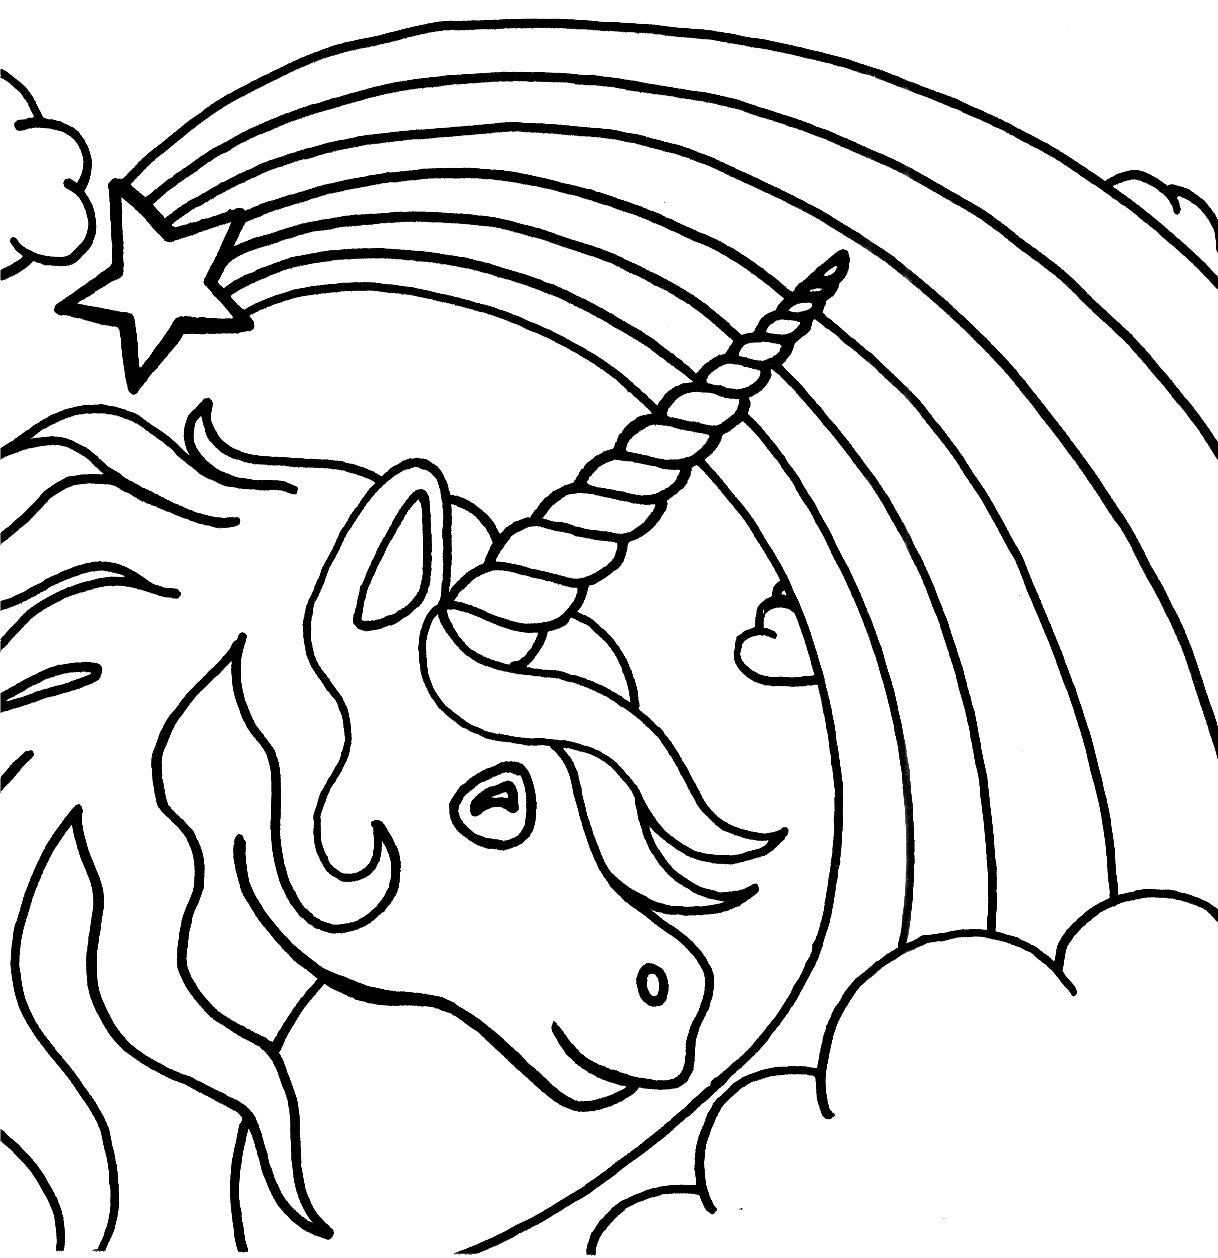 Free Printable Unicorn Coloring Pages For Kids | Fun | Pinterest - Free Printable Unicorn Coloring Pages